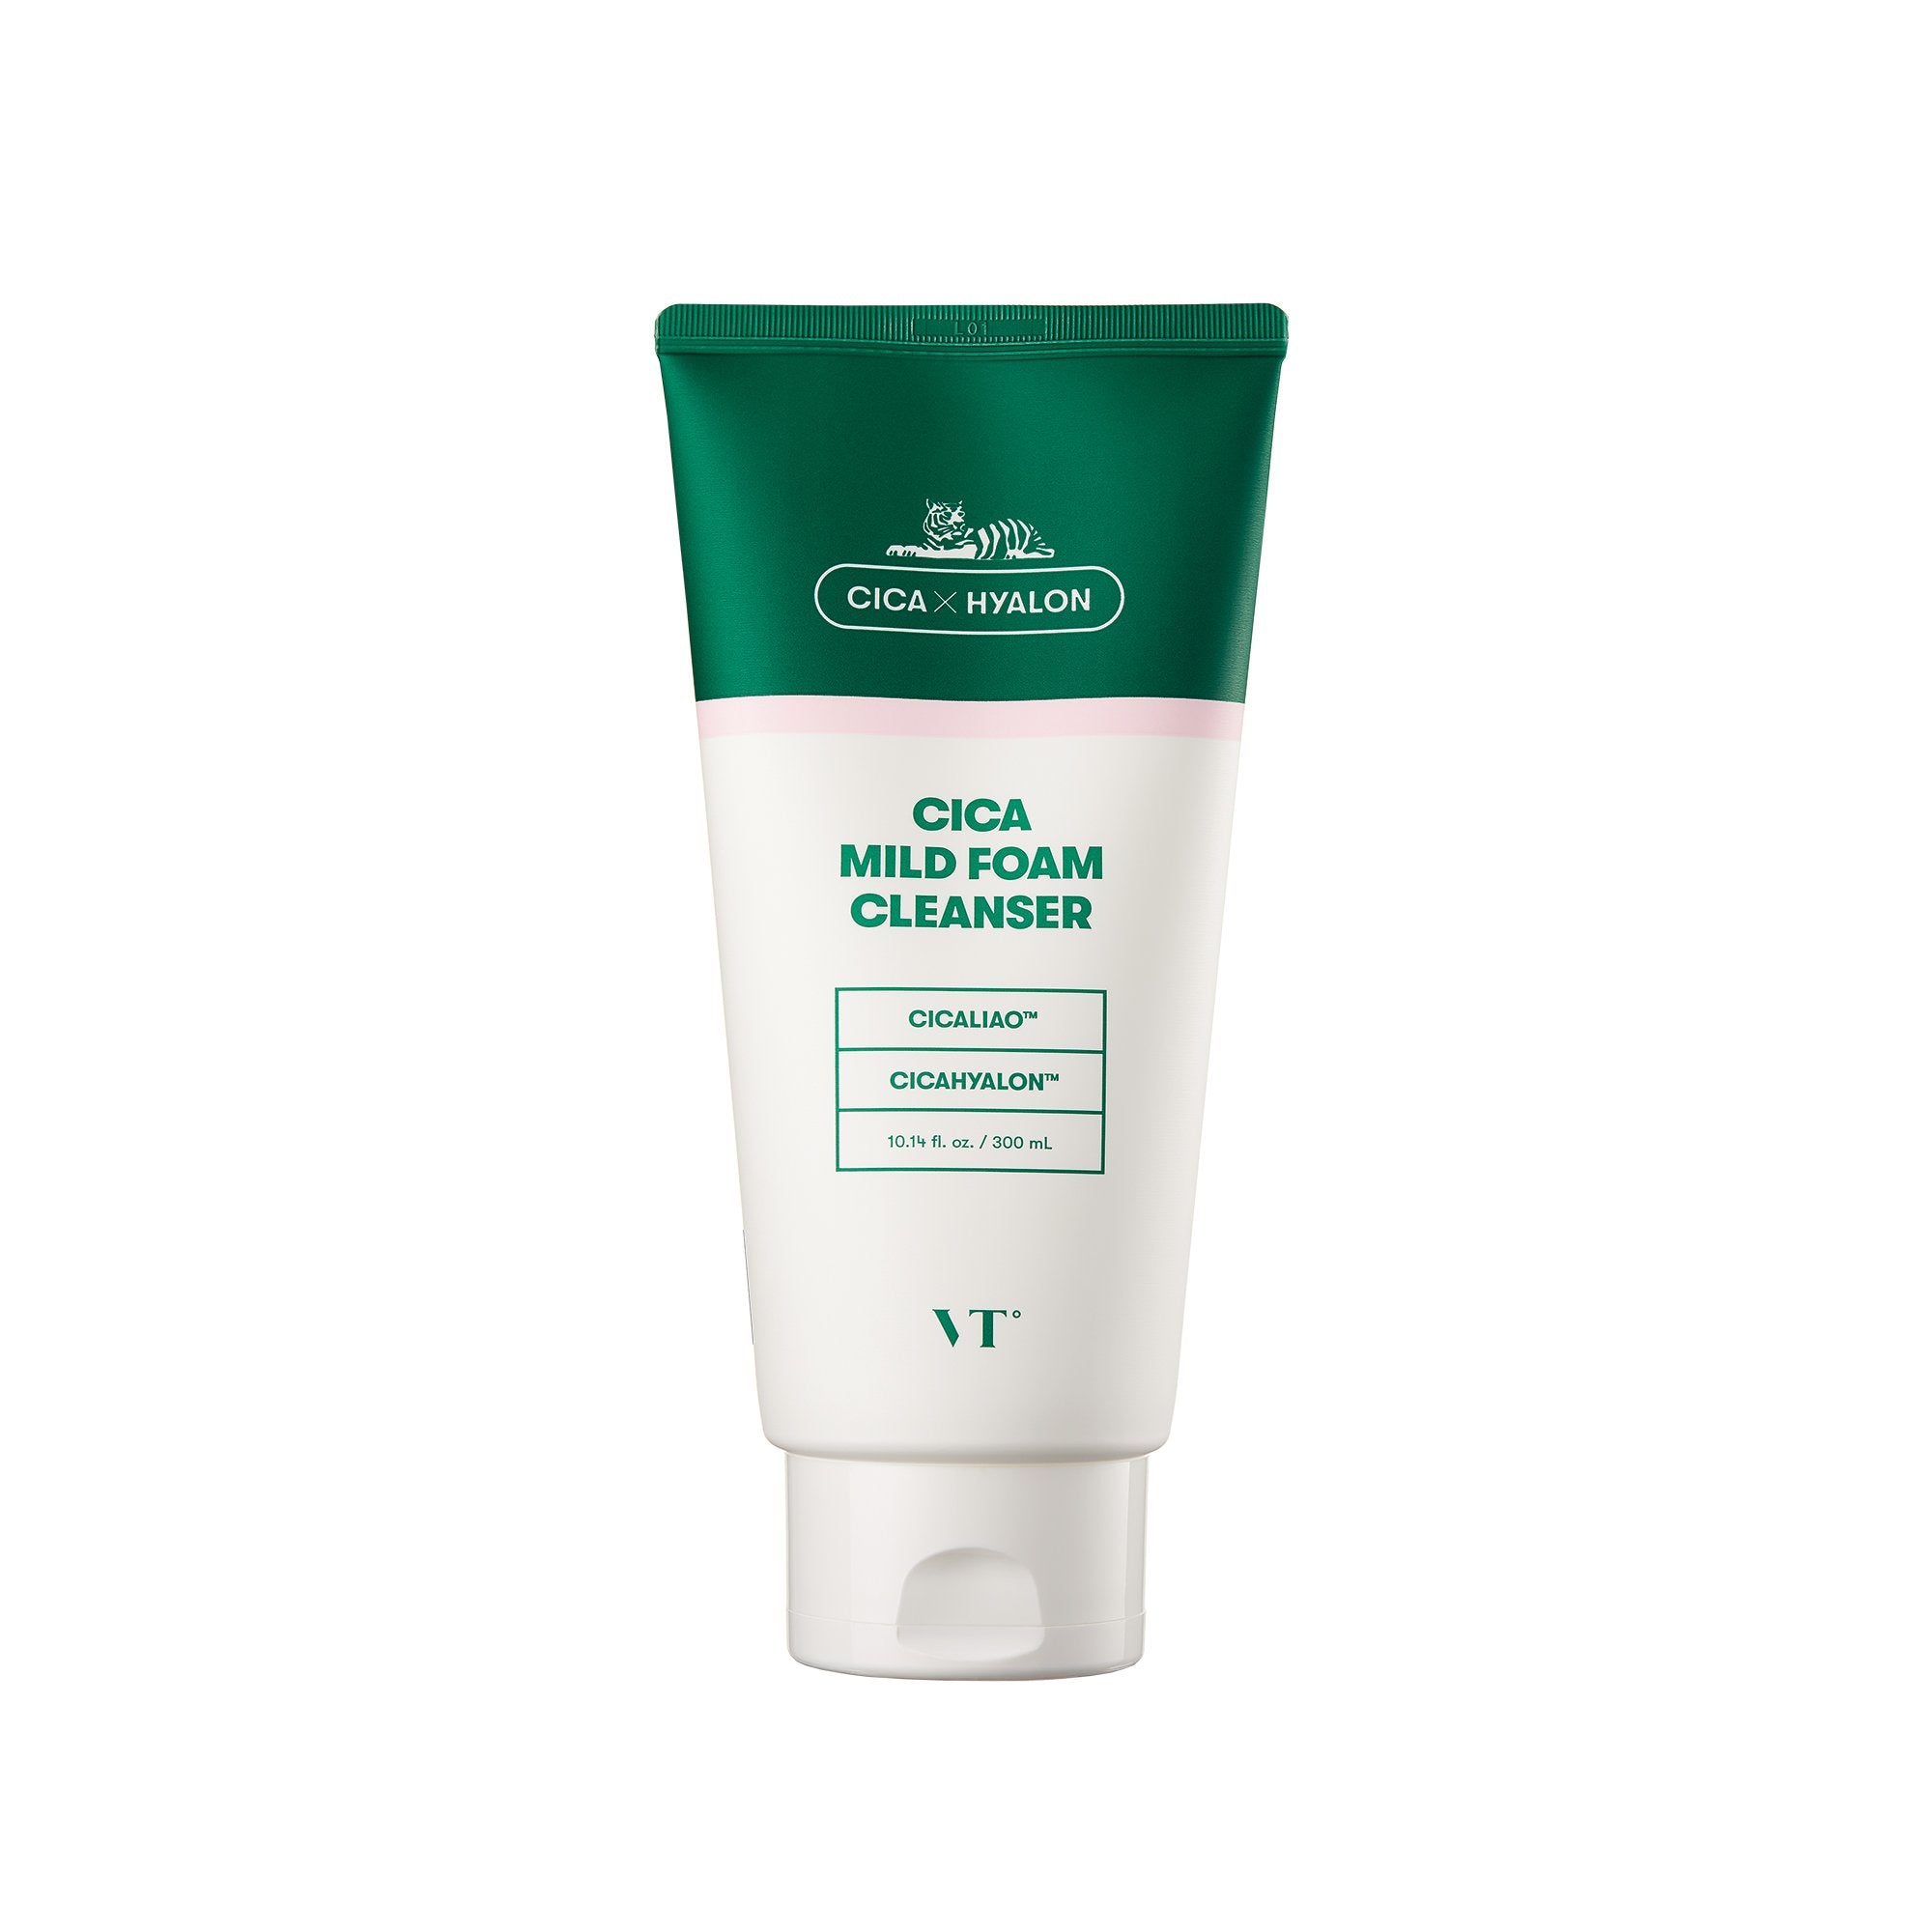 VT COSMETICS Cica Mild Foam Cleanser on sales on our Website !